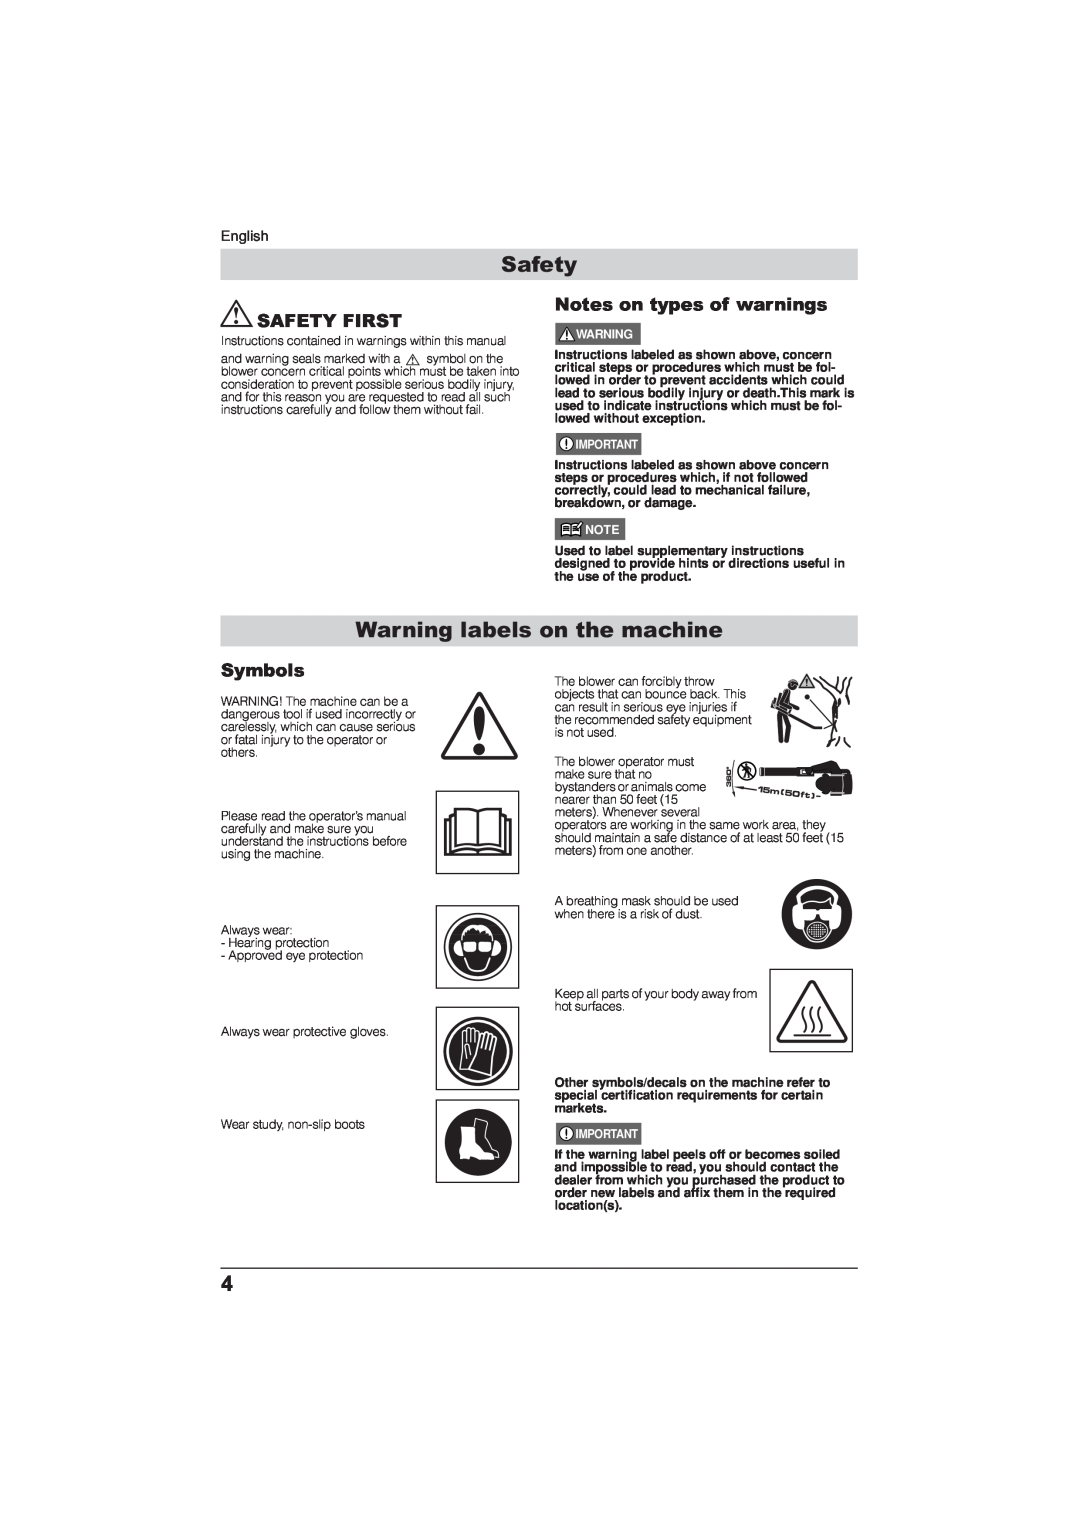 Husqvarna 115 24 05-95 Safety, Warning labels on the machine, Notes on types of warnings SAFETY FIRST, Symbols, English 